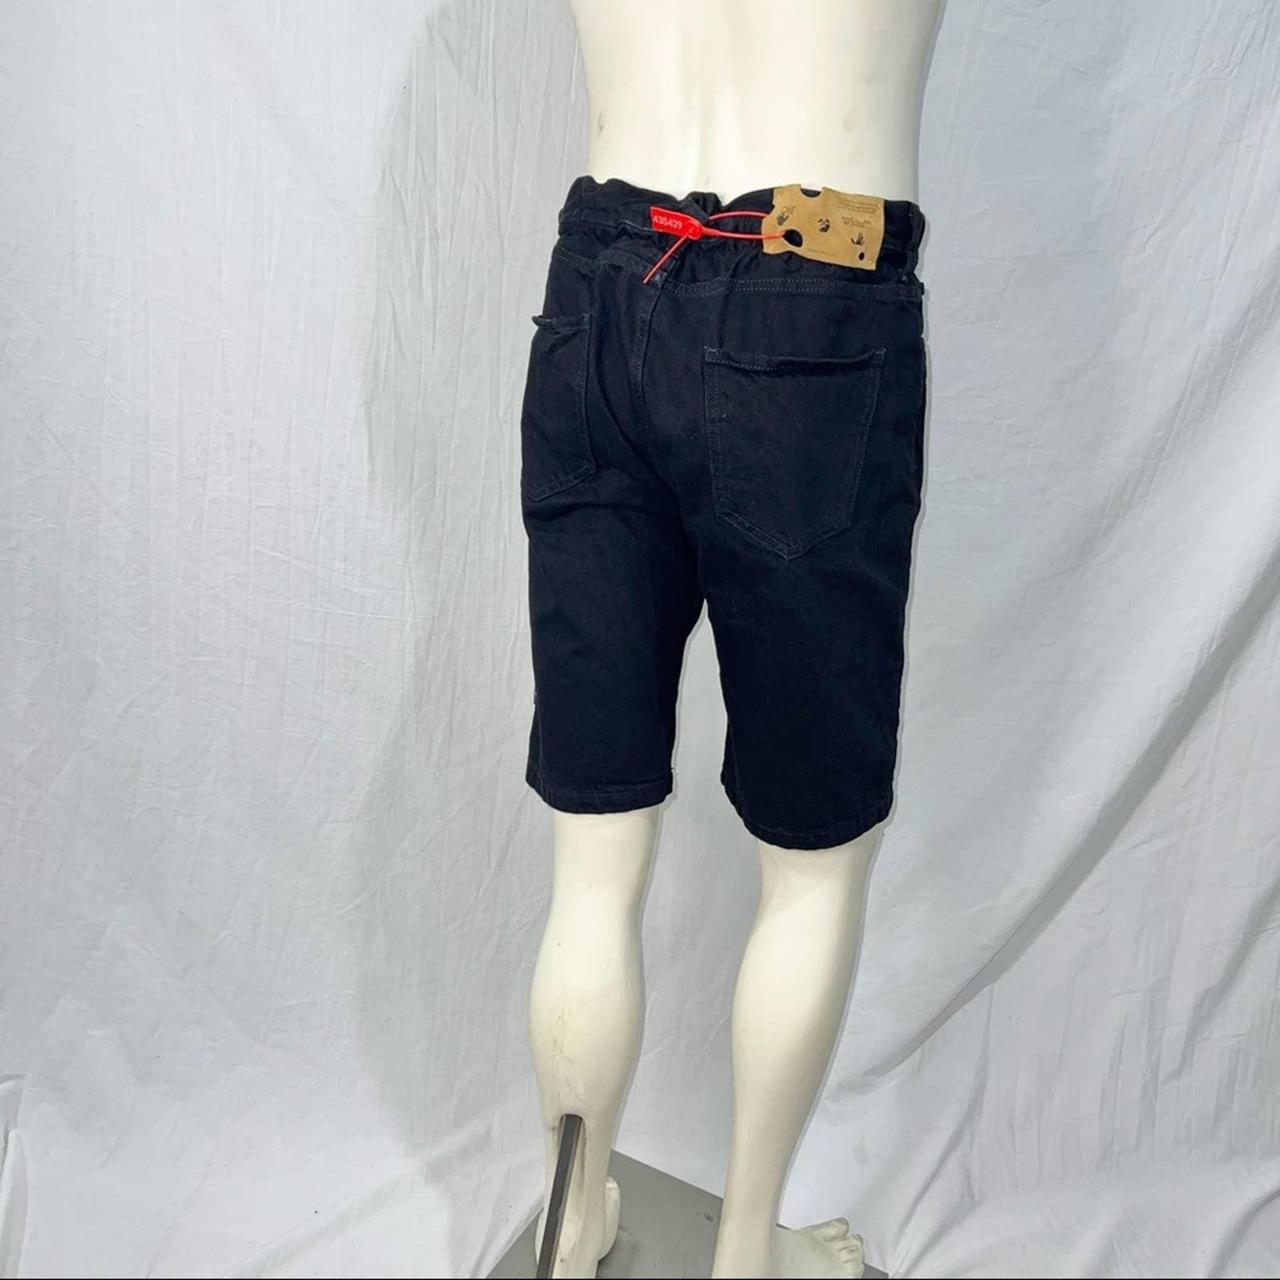 Product Image 2 - Label: Off-White
Style: Slim Low Crotch